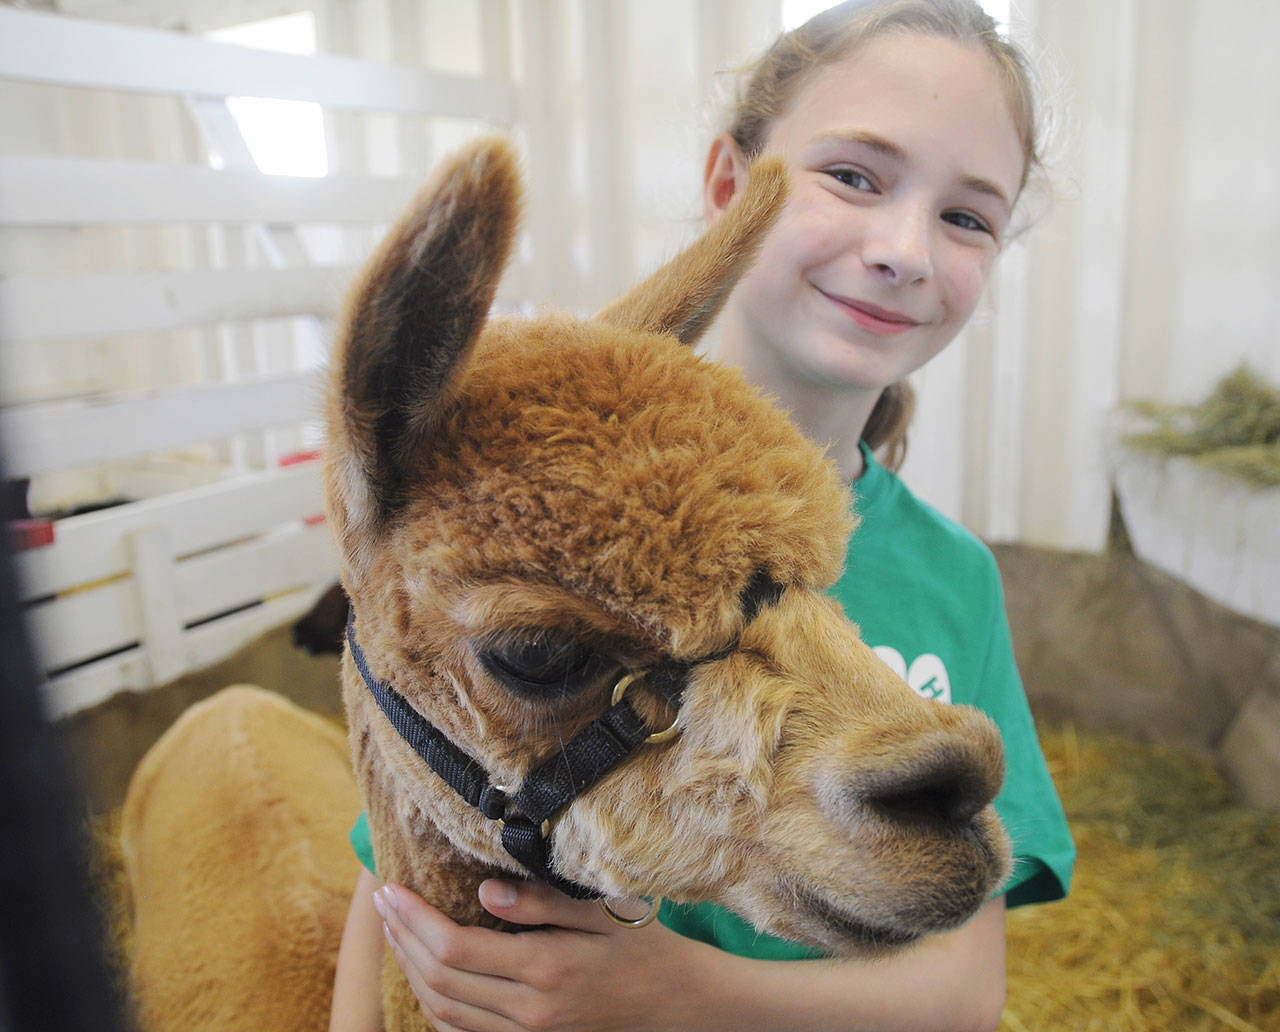 Faern Tait of Port Angeles shows off Valentina, a 10-year-old alpaca, at the 2019 Clallam County Fair. Officials have canceled the 2020 fair, saying Clallam County is not likely to be able to host large gatherings by mid-August. (Michael Dashiell/Olympic Peninsula News Group file)